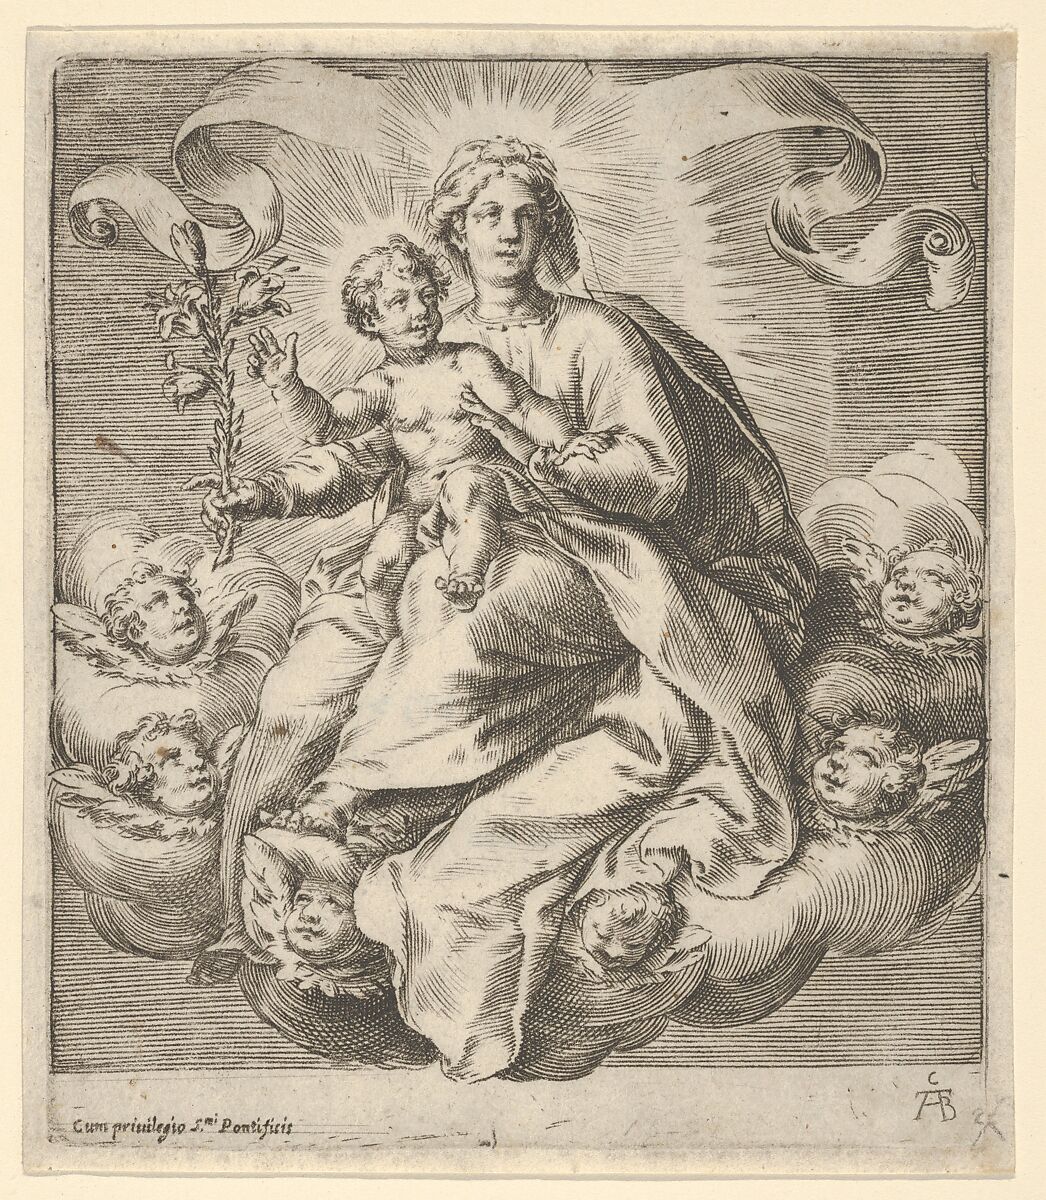 Madonna holding a lily branch with the Christ Child on her lap, seated on clouds, surrounded by cherub heads, Cherubino Alberti (Zaccaria Mattia) (Italian, Borgo Sansepolcro 1553–1615 Rome), Engraving 